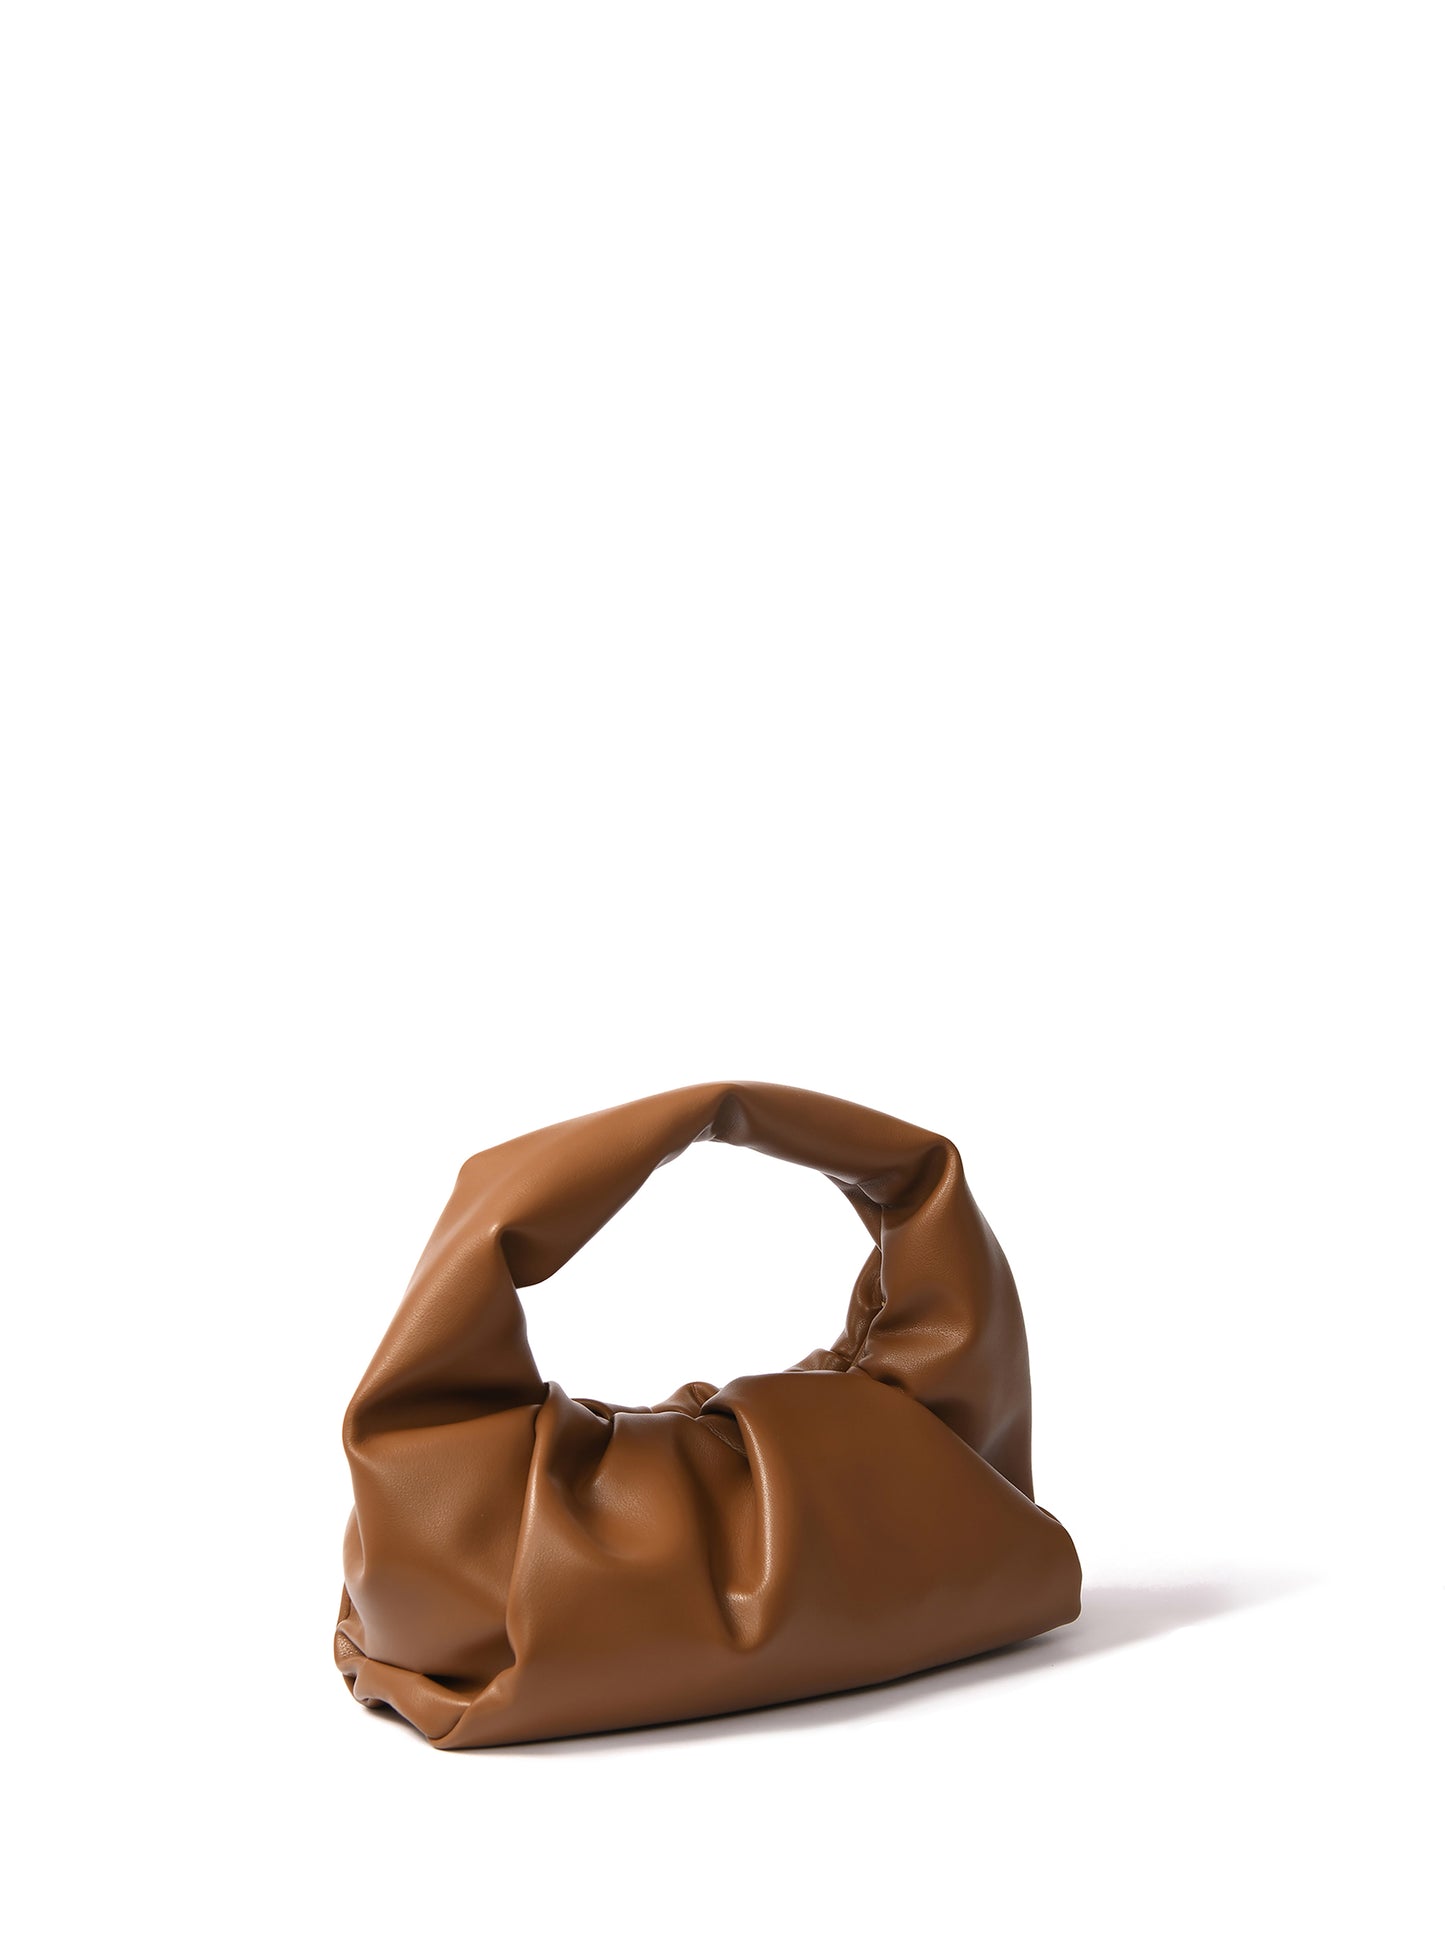 Marshmallow Croissant Bag in Soft Leather, Caramel